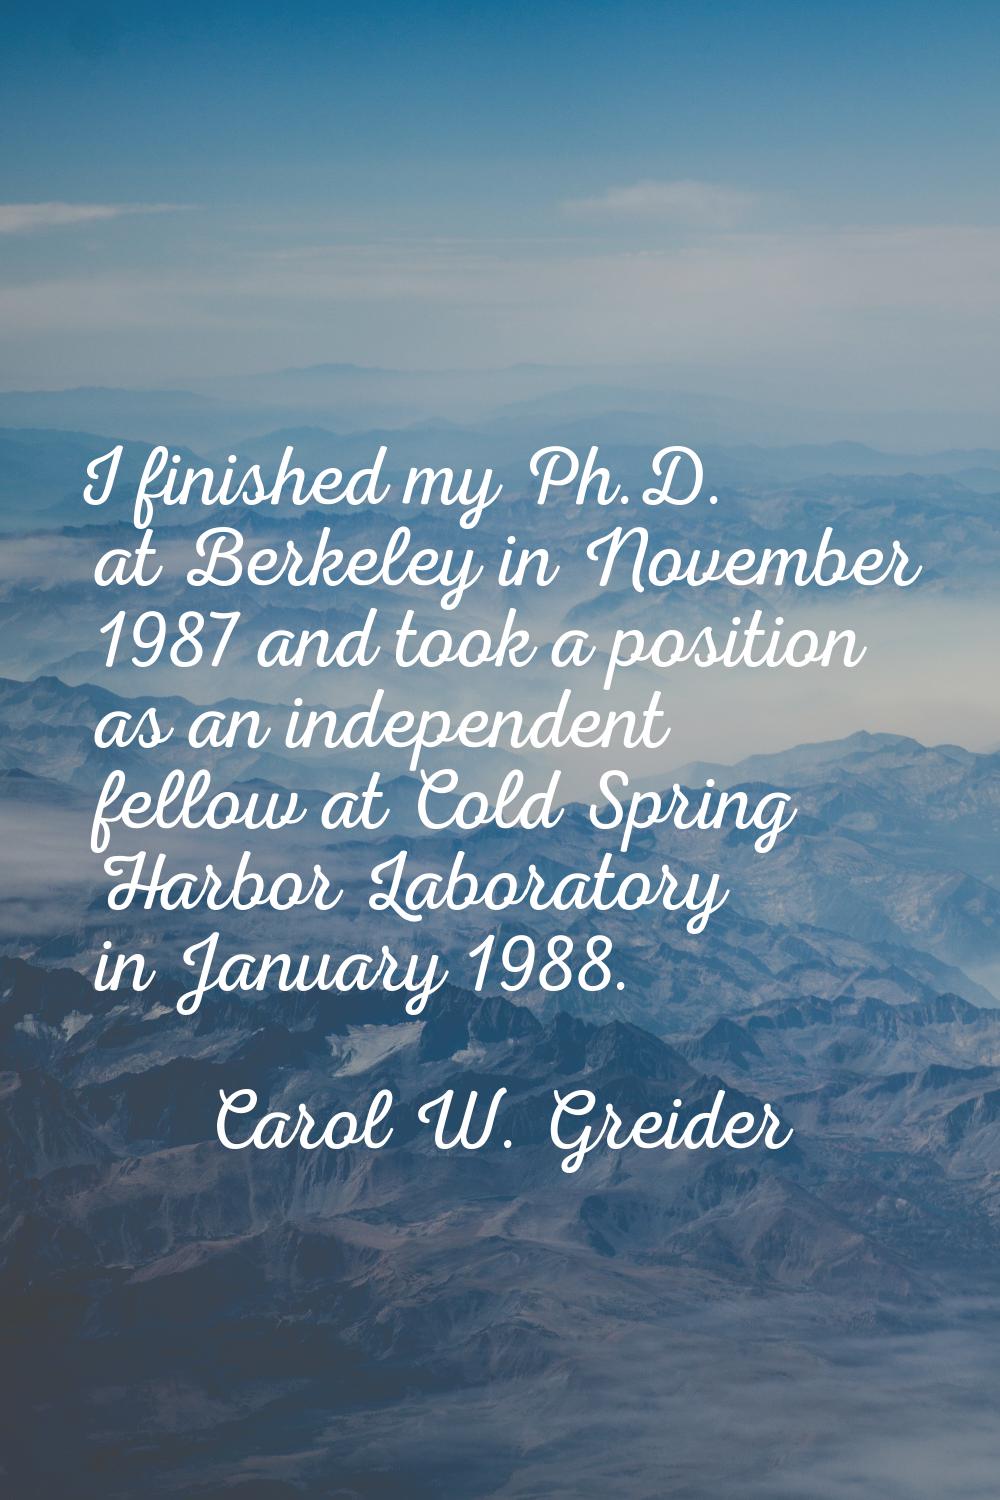 I finished my Ph.D. at Berkeley in November 1987 and took a position as an independent fellow at Co